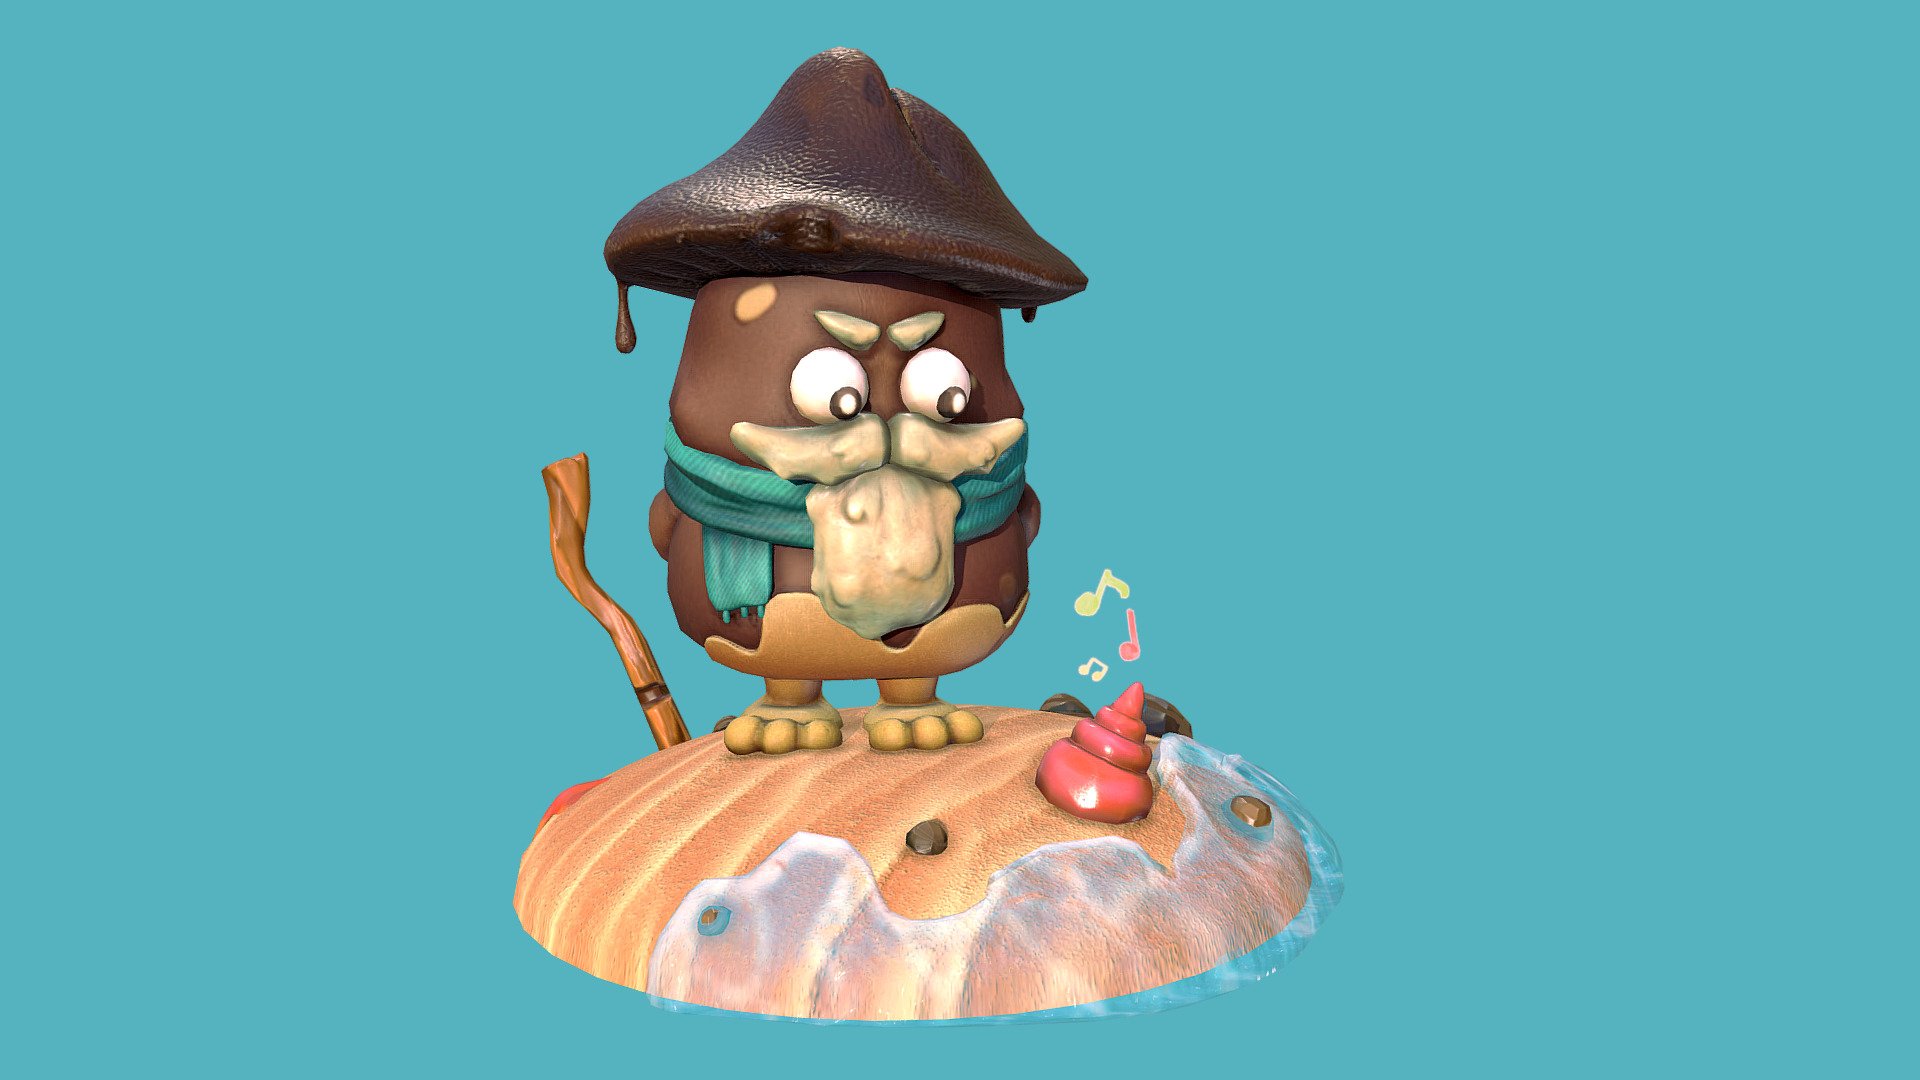 While strolling along the sea Rocky hears some music&hellip; coming out of a shell? 
As this is my first time retopo-ing a creature &amp; working with substance I learned lots of new things! 
For the Cute Creature assignment at Howest DAE I decided to sculpt Rocky, 
a mushroom I designed : https://www.instagram.com/p/B7UDiJZJweL/?igshid=h91okv2zmqjl
Rocky is an old mushroom who wants to spend his last moments at the sea, he spends his last moments listening to the waves. 

You can check it on my artstation : https://www.artstation.com/artwork/oOn3xw

Modeling in Zbrush, retopology in 3ds max and texturing in Substance Painter 3d model